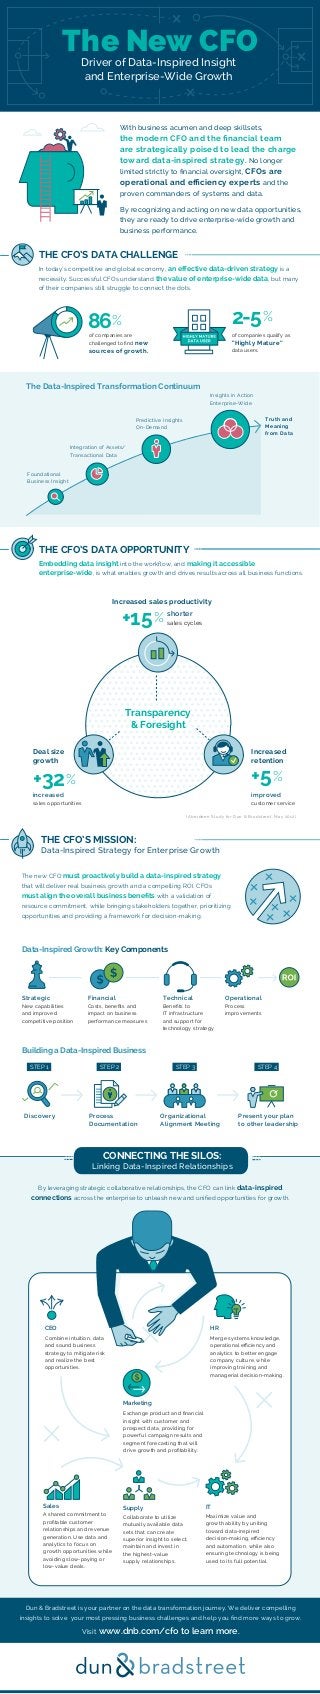 The Data-Inspired Transformation Continuum
Integration of Assets/
Transactional Data
Foundational
Business Insight
Predictive Insights
On-Demand
Insights in Action
Enterprise-Wide
Truth and
Meaning
from Data
Driver of Data-Inspired Insight
and Enterprise-Wide Growth
The New CFO
Deal size
growth
Increased
retention
shorter
sales cycles+15%
increased
sales opportunities
+32%
Increased sales productivity
improved
customer service
+5%
Transparency
& Foresight
By recognizing and acting on new data opportunities,
they are ready to drive enterprise-wide growth and
business performance.
With business acumen and deep skillsets,
the modern CFO and the ﬁnancial team
are strategically poised to lead the charge
toward data-inspired strategy. No longer
limited strictly to ﬁnancial oversight, CFOs are
operational and eﬃciency experts and the
proven commanders of systems and data.
THE CFO’S DATA CHALLENGE
In today’s competitive and global economy, an eﬀective data-driven strategy is a
necessity. Successful CFOs understand the value of enterprise-wide data, but many
of their companies still struggle to connect the dots.
THE CFO’S DATA OPPORTUNITY
Embedding data insight into the workﬂow, and making it accessible
enterprise-wide, is what enables growth and drives results across all business functions.
of companies are
challenged to ﬁnd new
sources of growth.
86%
of companies qualify as
“Highly Mature”
data users.
2-5%
THE CFO’S MISSION:
Data-Inspired Strategy for Enterprise Growth
CONNECTING THE SILOS:
Linking Data-Inspired Relationships
The new CFO must proactively build a data-inspired strategy
that will deliver real business growth and a compelling ROI. CFOs
must align the overall business beneﬁts with a validation of
resource commitment, while bringing stakeholders together, prioritizing
opportunities and providing a framework for decision-making.
Data-Inspired Growth: Key Components
Building a Data-Inspired Business
Strategic
New capabilities
and improved
competitive position
Financial
Costs, beneﬁts and
impact on business
performance measures
Technical
Beneﬁts to
IT infrastructure
and support for
technology strategy
Operational
Process
improvements
Discovery Process
Documentation
Organizational
Alignment Meeting
Present your plan
to other leadership
STEP 1 STEP 2 STEP 3 STEP 4
(Aberdeen Study for Dun & Bradstreet, May 2012)
By leveraging strategic collaborative relationships, the CFO can link data-inspired
connections across the enterprise to unleash new and uniﬁed opportunities for growth.
CEO
Combine intuition, data
and sound business
strategy to mitigate risk
and realize the best
opportunities.
HR
Merge systems knowledge,
operational eﬃciency and
analytics to better engage
company culture, while
improving training and
managerial decision-making.
Sales
A shared commitment to
proﬁtable customer
relationships and revenue
generation. Use data and
analytics to focus on
growth opportunities while
avoiding slow-paying or
low-value deals.
Marketing
Exchange product and ﬁnancial
insight with customer and
prospect data, providing for
powerful campaign results and
segment forecasting that will
drive growth and proﬁtability.
Supply
Collaborate to utilize
mutually available data
sets that can create
superior insight to select,
maintain and invest in
the highest-value
supply relationships.
IT
Maximize value and
growth ability by uniting
toward data-inspired
decision-making, eﬃciency
and automation, while also
ensuring technology is being
used to its full potential.
Dun & Bradstreet is your partner on the data transformation journey. We deliver compelling
insights to solve your most pressing business challenges and help you ﬁnd more ways to grow.
Visit www.dnb.com/cfo to learn more.
 